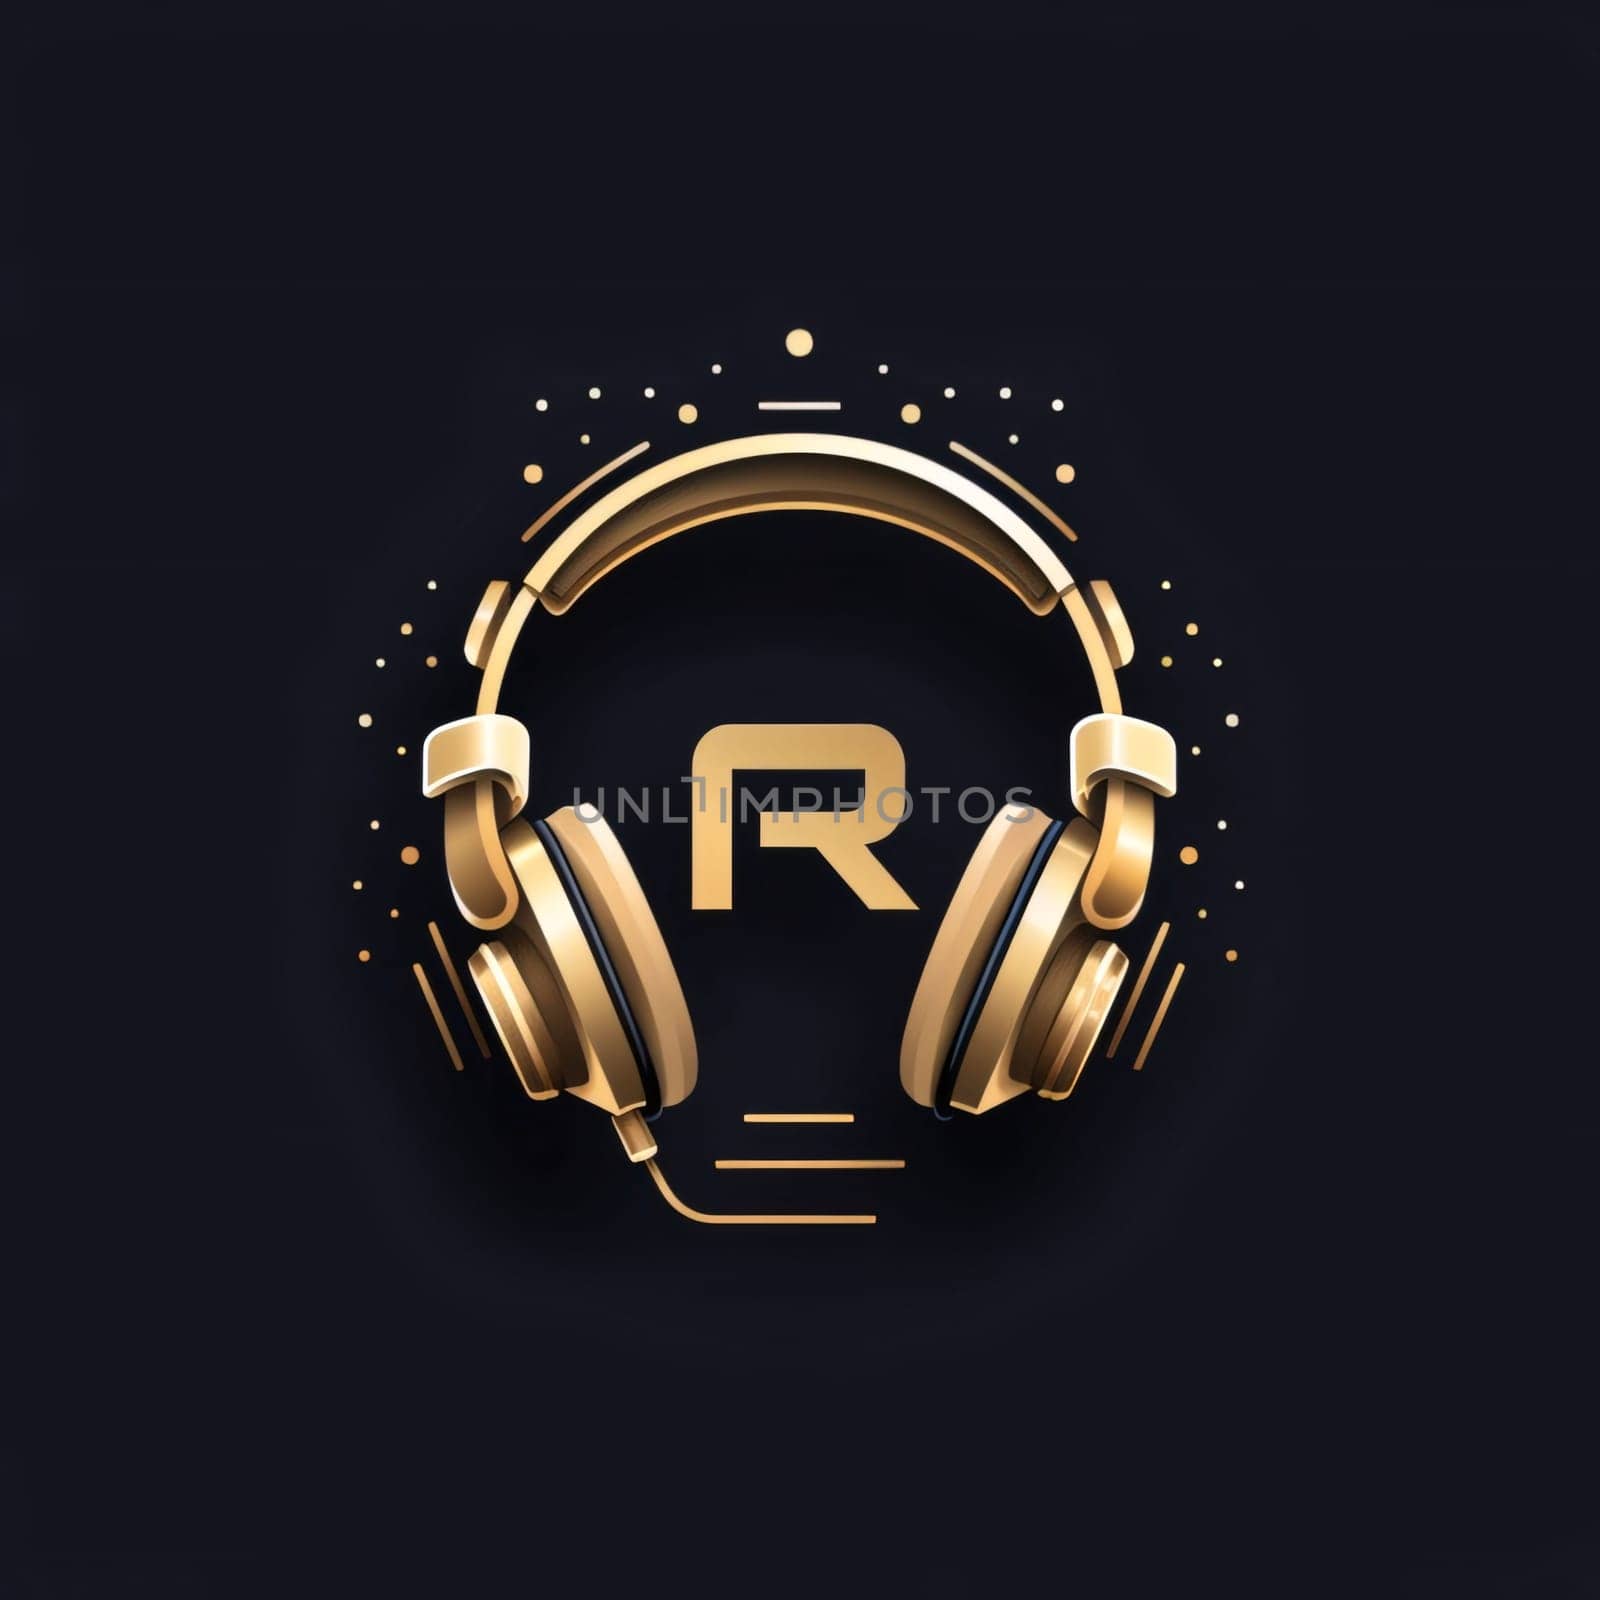 Graphic alphabet letters: Gold headphones and letter R. Isolated on black background. Vector illustration.